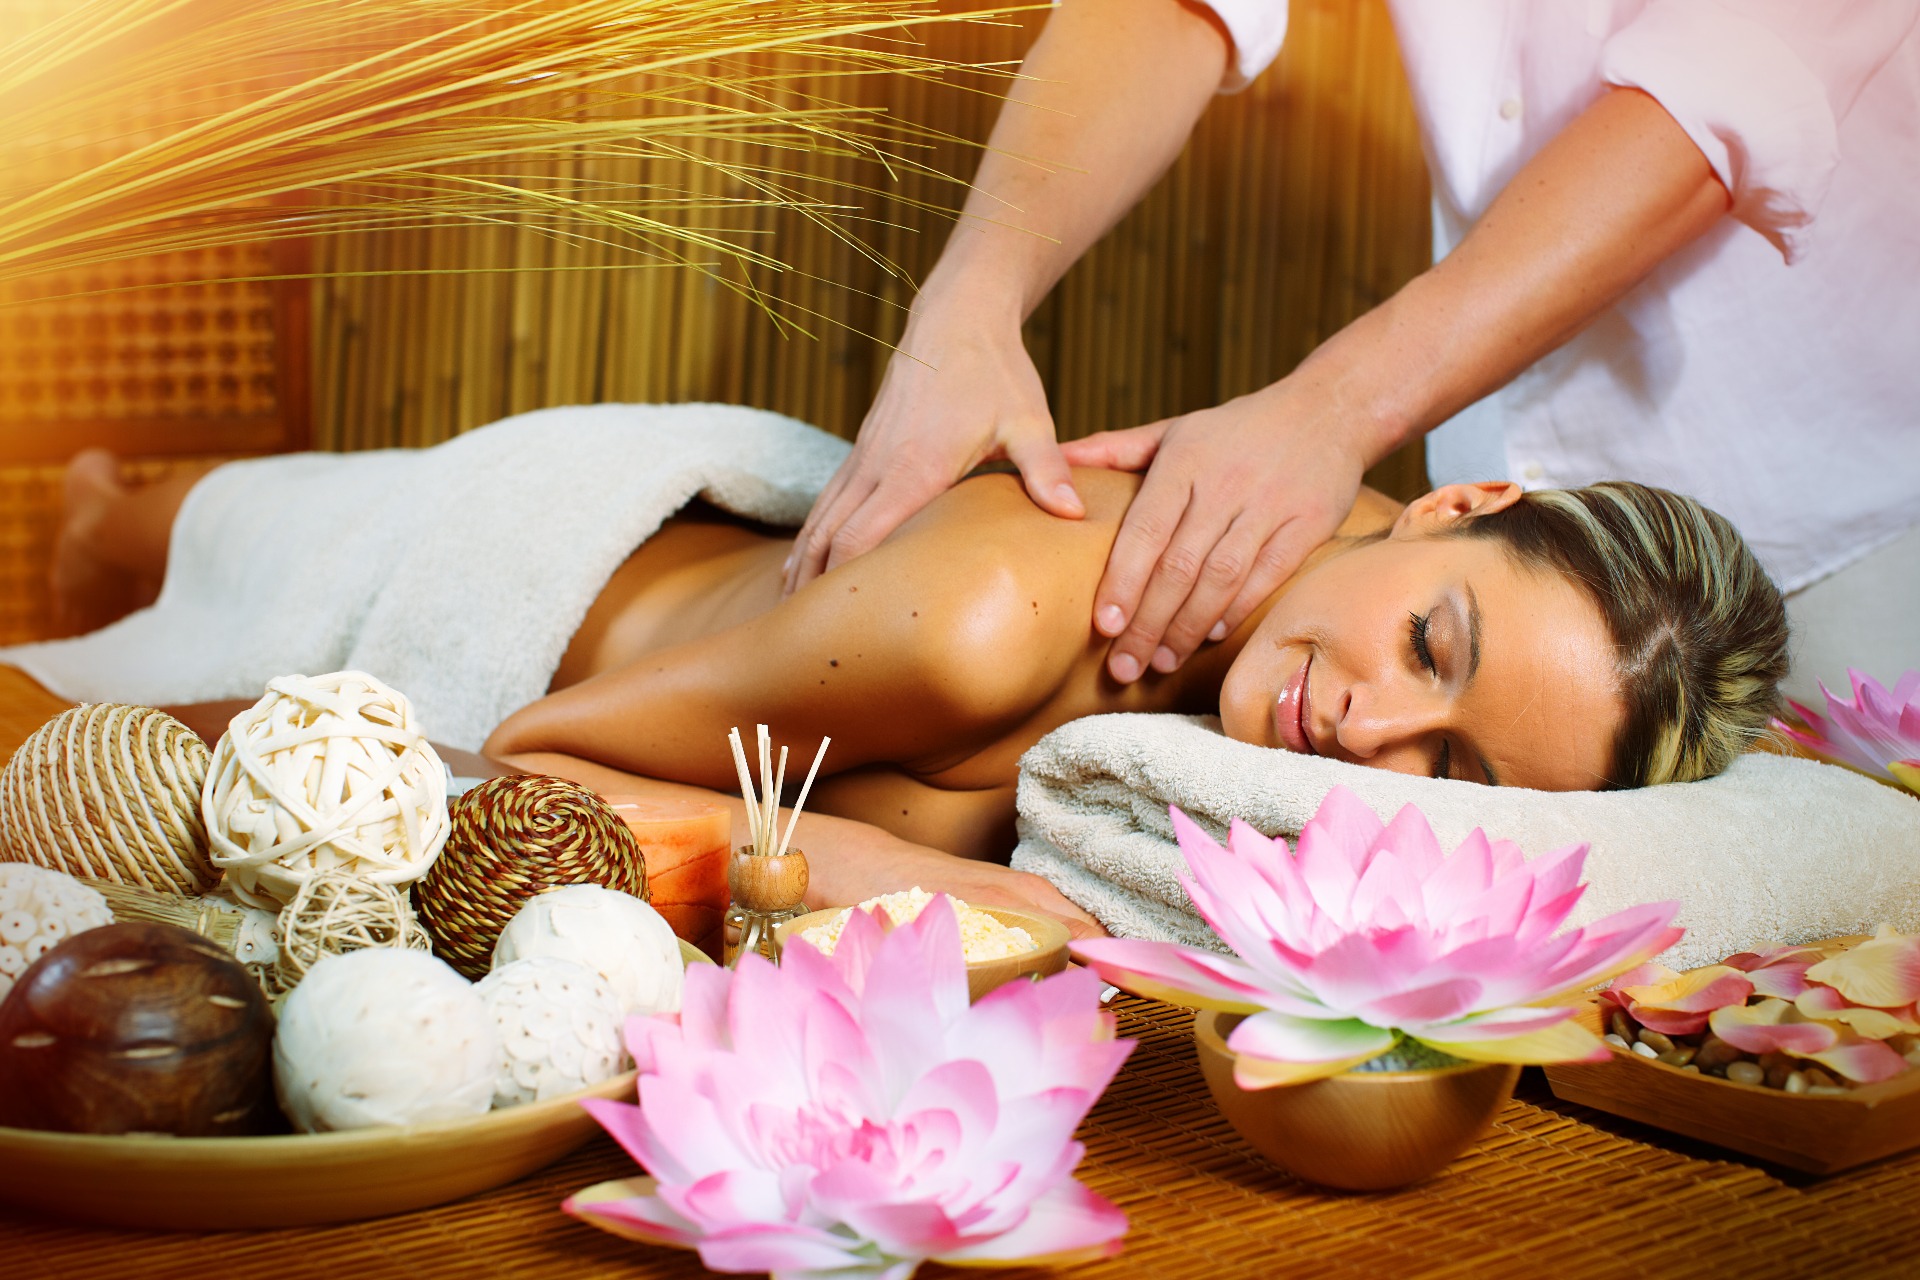 Radian Spa, Here you will find best body massage service for men in Vidhyadhar Nagar, Jaipur by female & male. We invites you to give your body and soul a feeling of relaxation and peace!